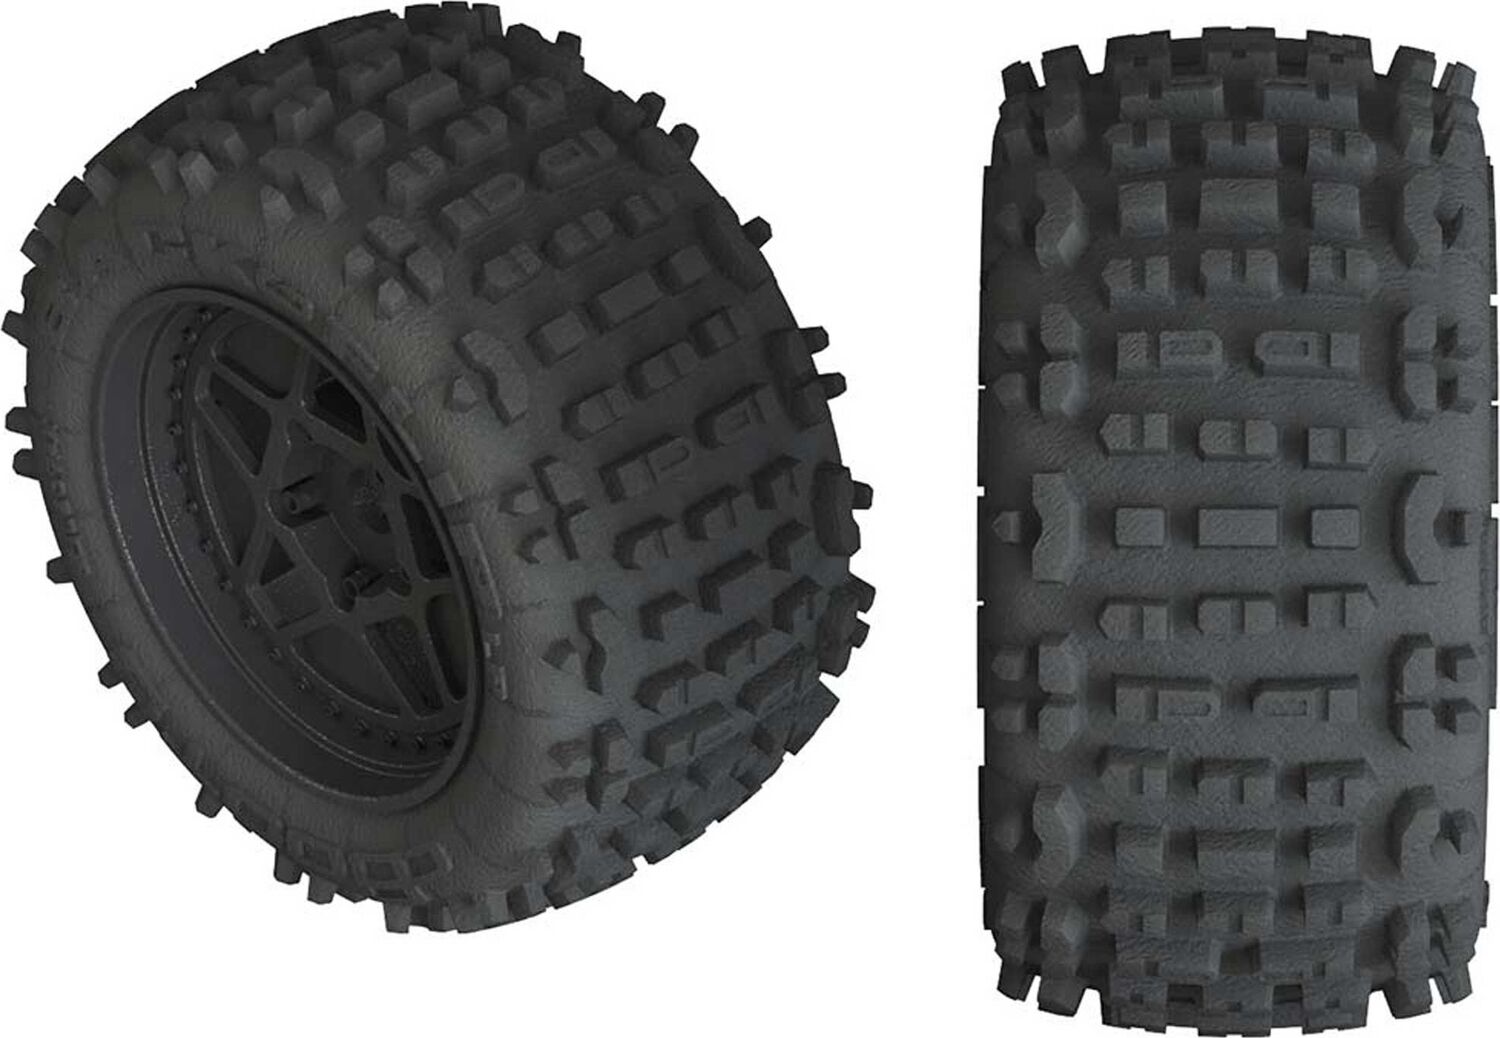 1/10 dBoots Backflip LP Front/Rear 3.8 Pre-Mounted Tires, 17mm Hex, Black (2): 4S